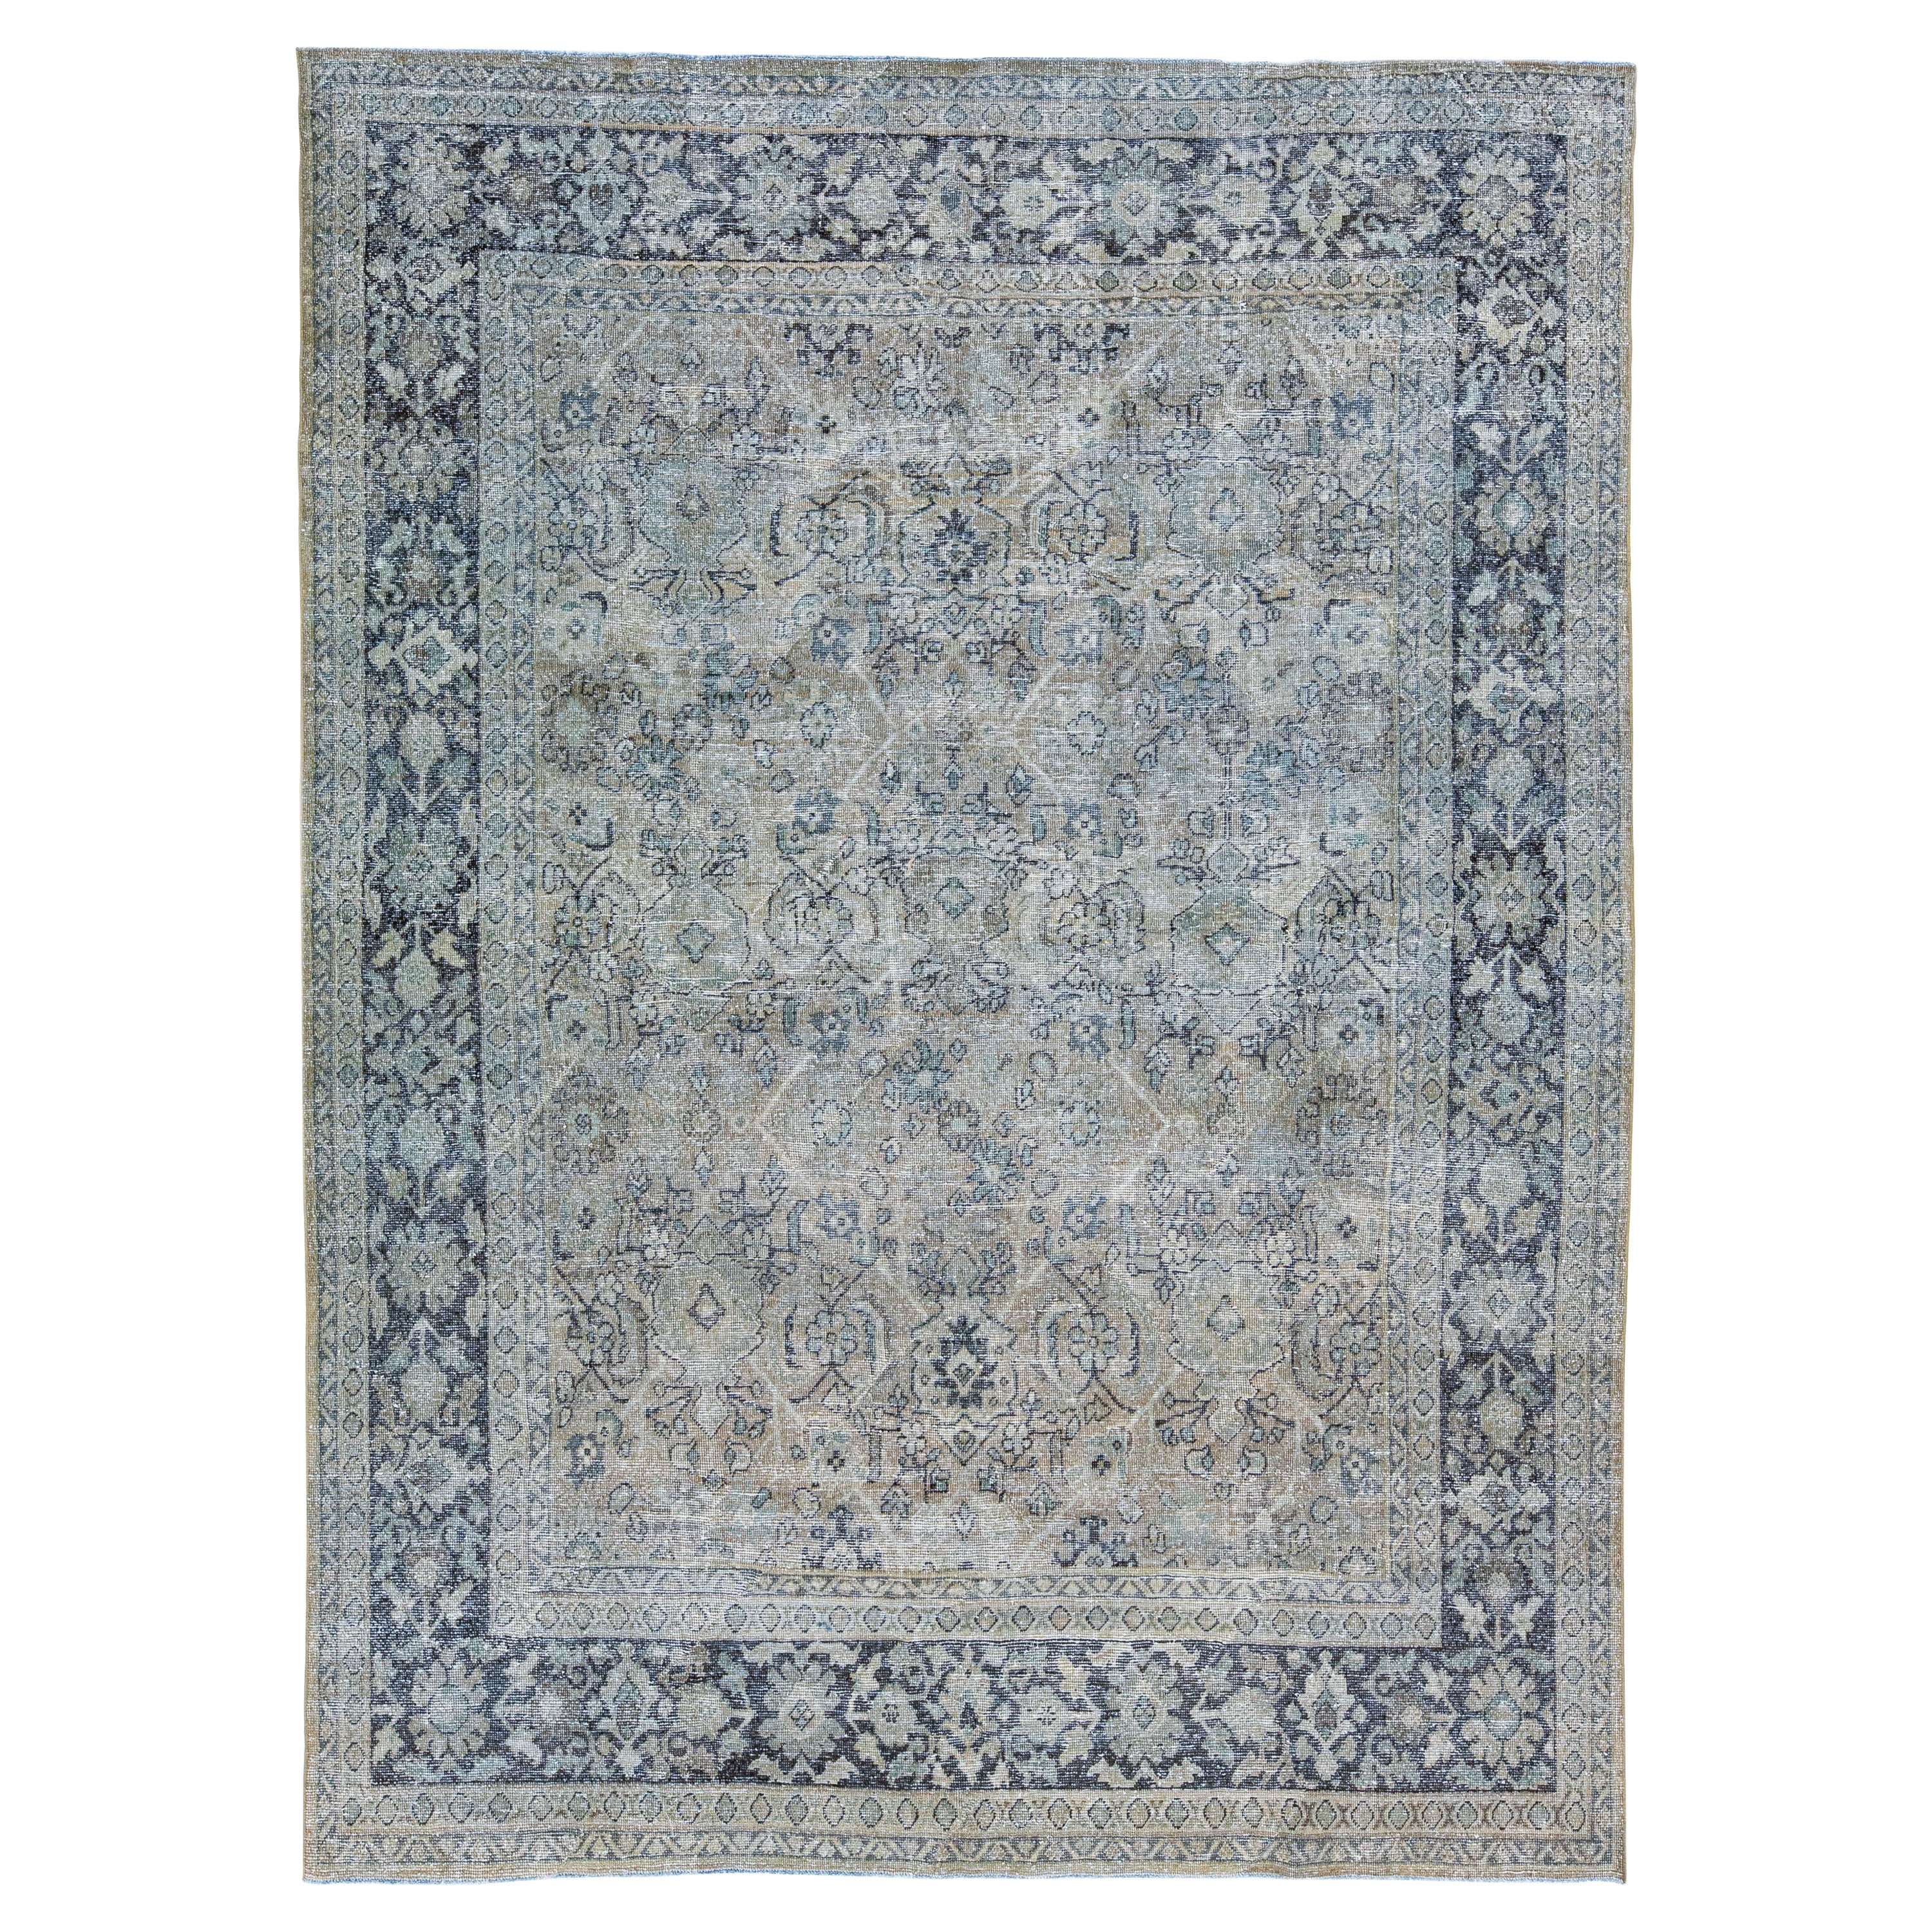 Antique Handmade Grey Persian Tabriz Wool Rug with Shah Abbasi Design For Sale